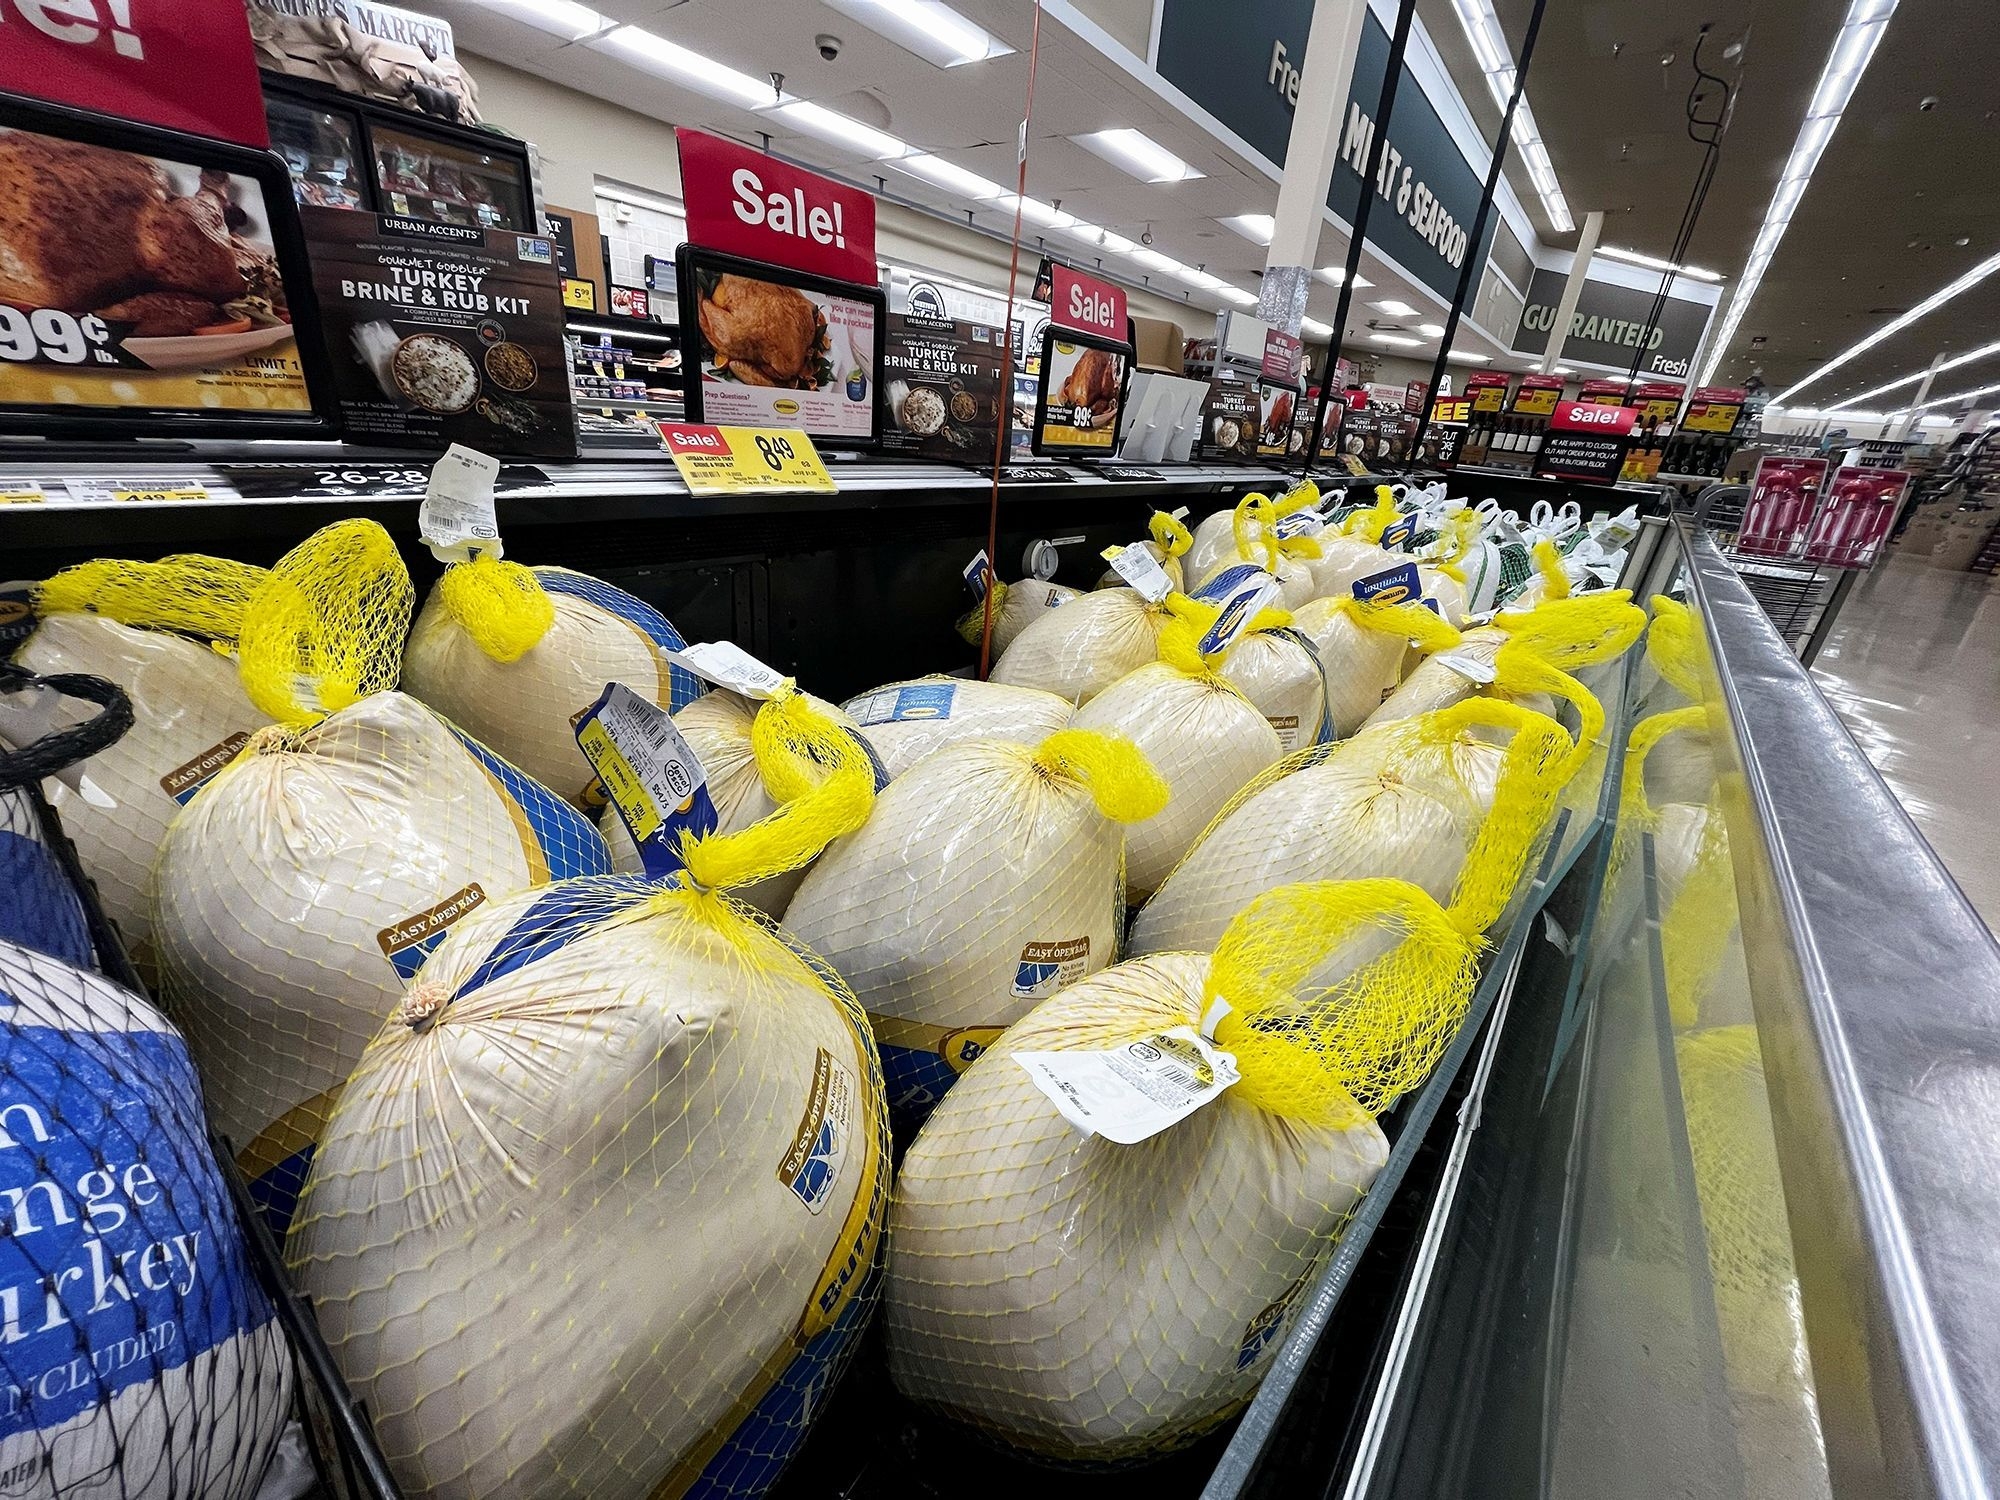 Butterball releases 2023 Thanksgiving Outlook Report